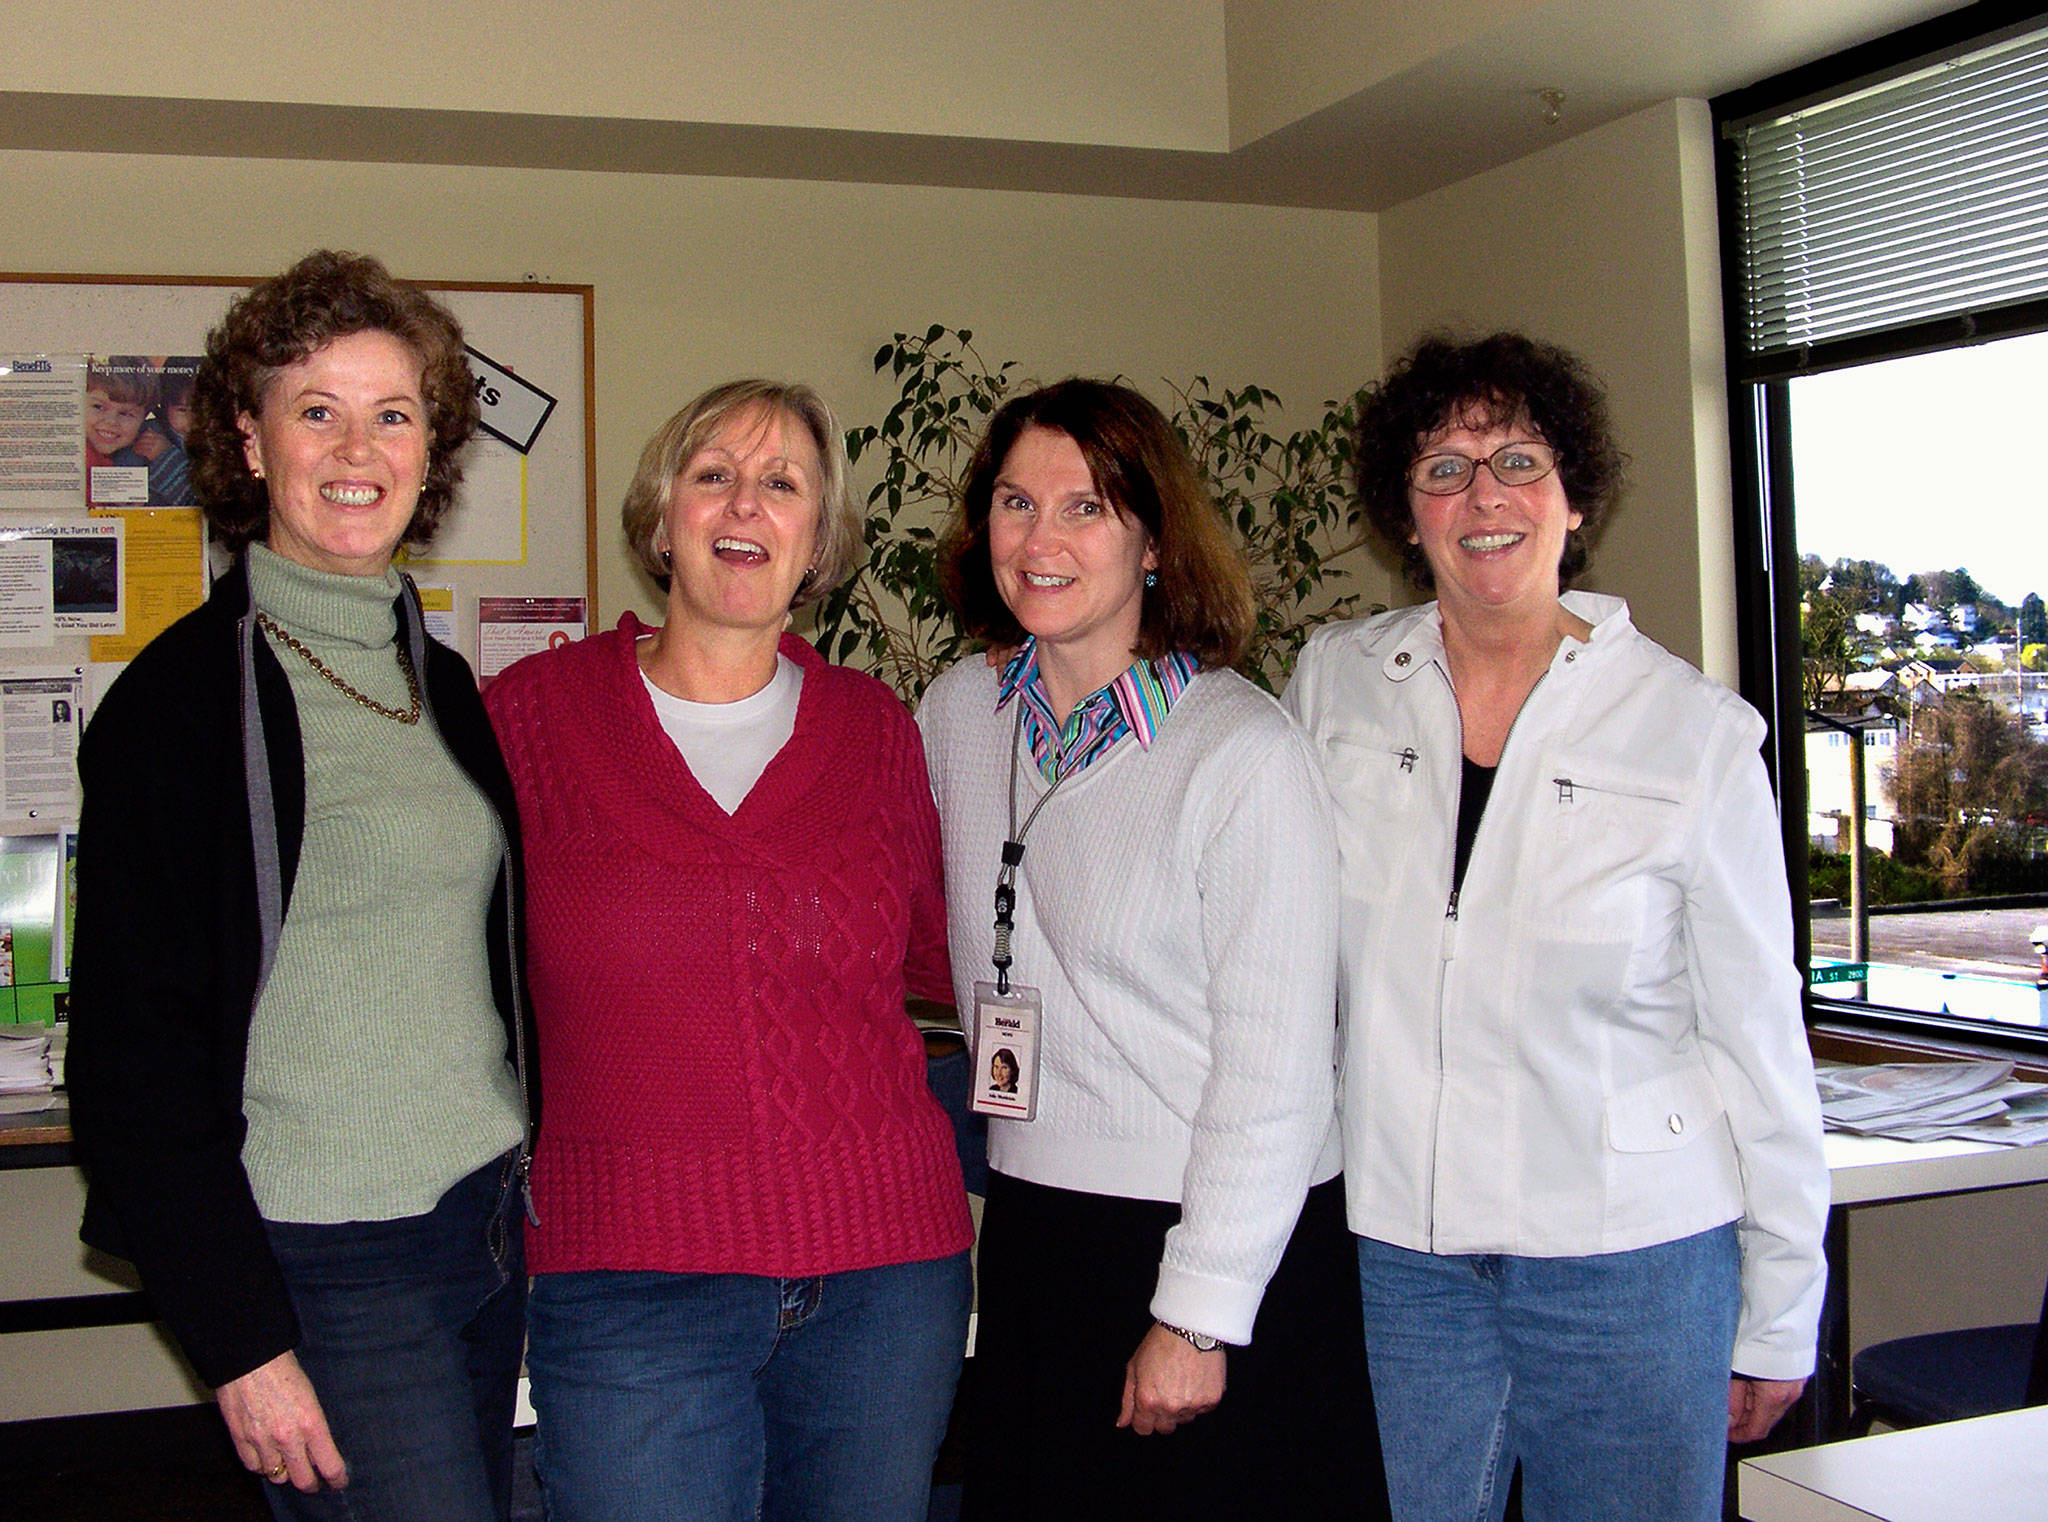 Stephanie Griffith (second from left), a longtime teacher at Maltby Elementary School, died of cancer in May 2018. Pictured here, in 2006, are friends from Spokane’s Ferris High School class of 1972, (from left) Kristy Hopkins Kunkle, Stephanie Griffith, Julie Muhlstein and Linda Jovanovich.